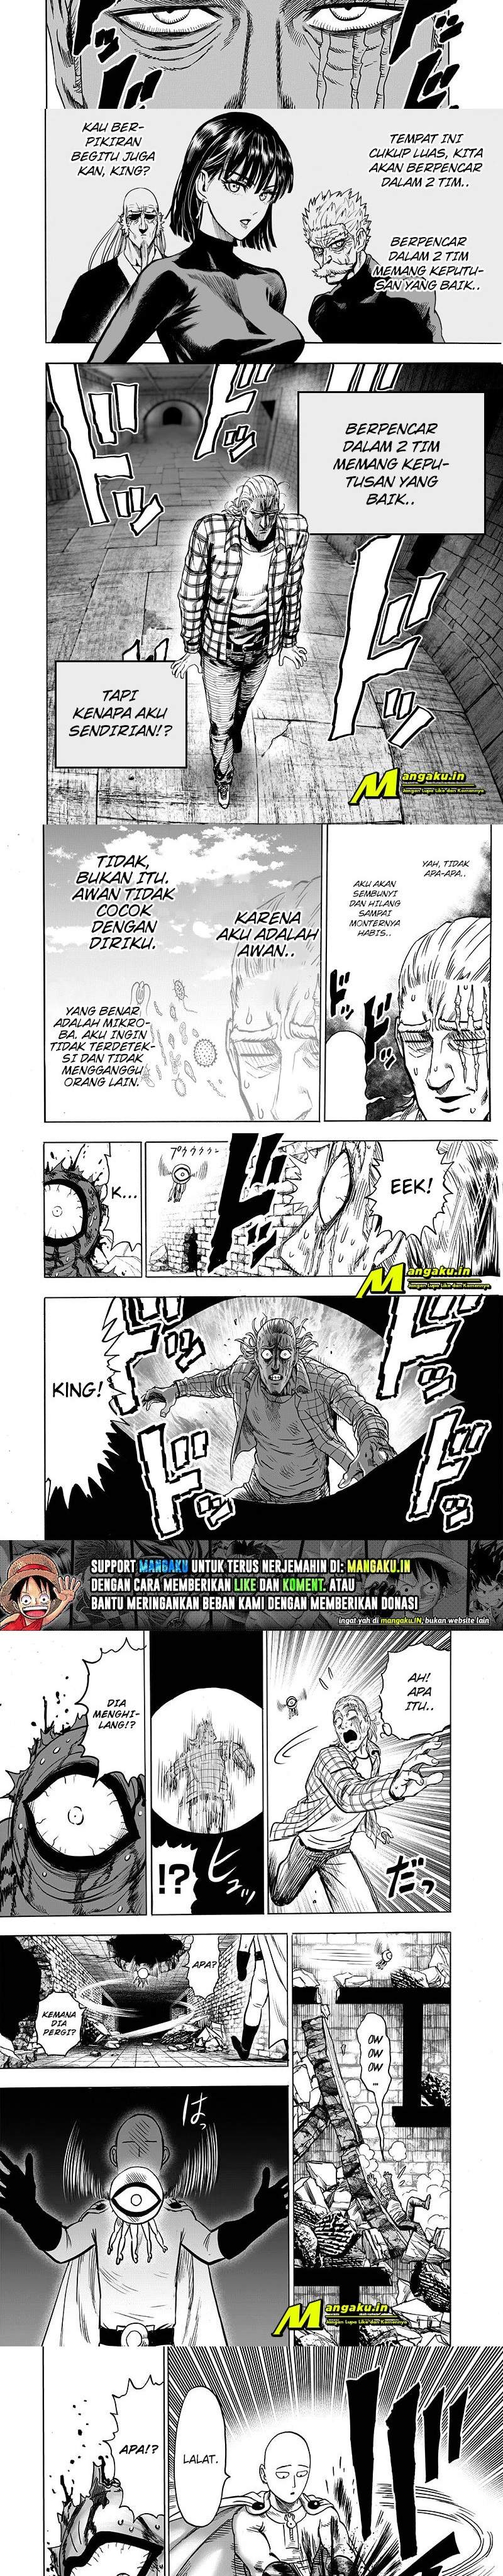 One Punch Man Chapter 199.2 (109.5, Redraw Ver)